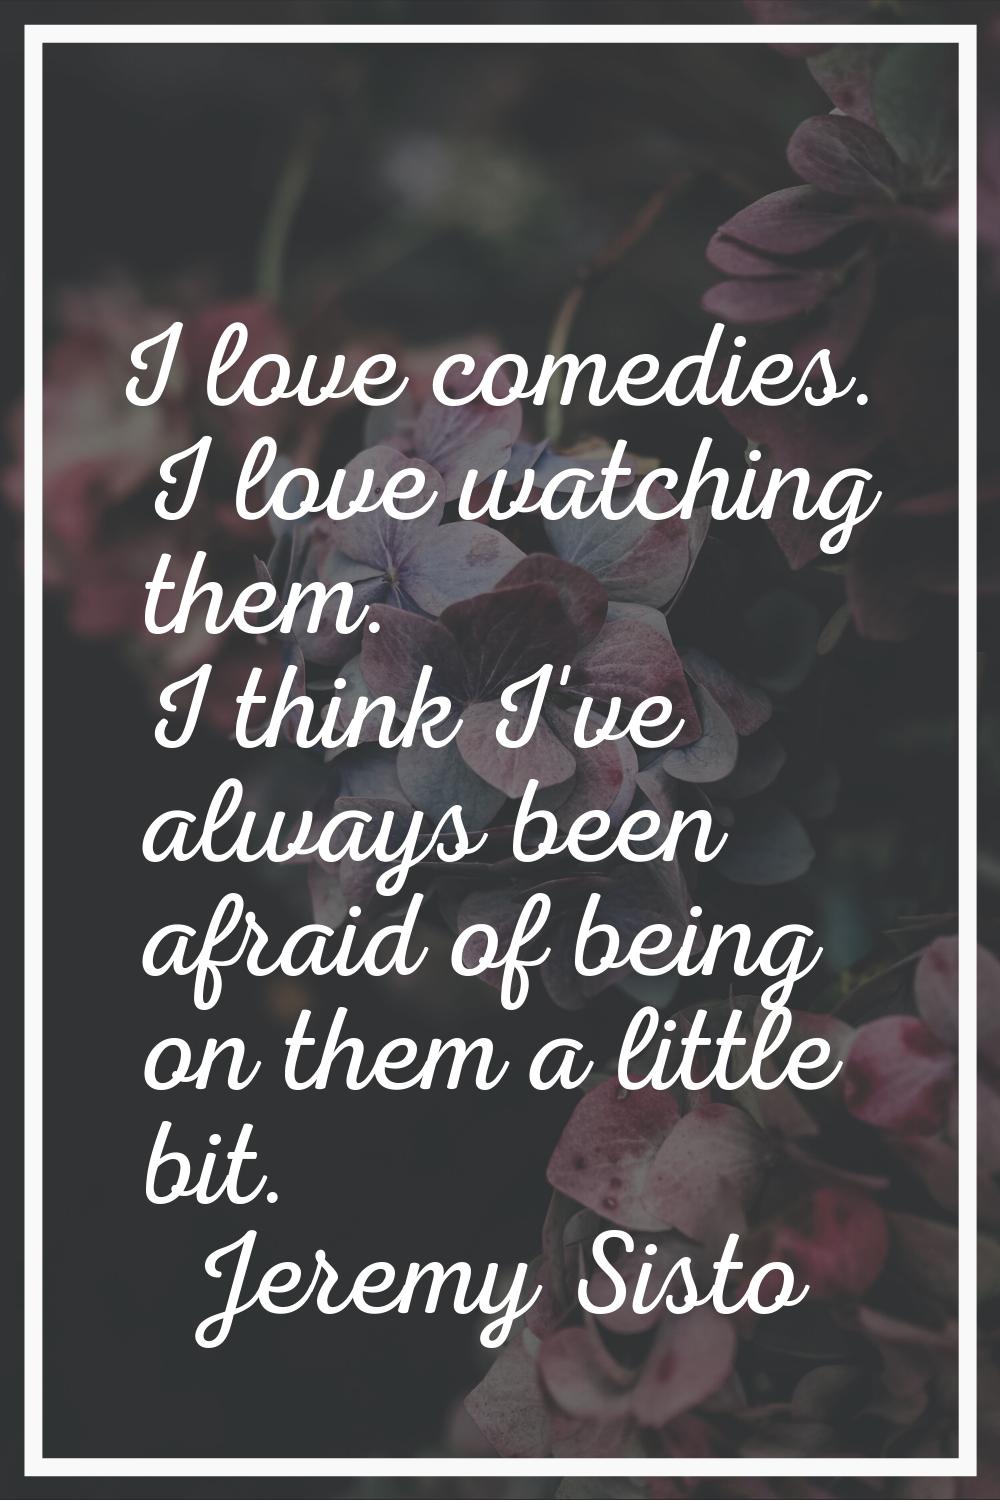 I love comedies. I love watching them. I think I've always been afraid of being on them a little bi